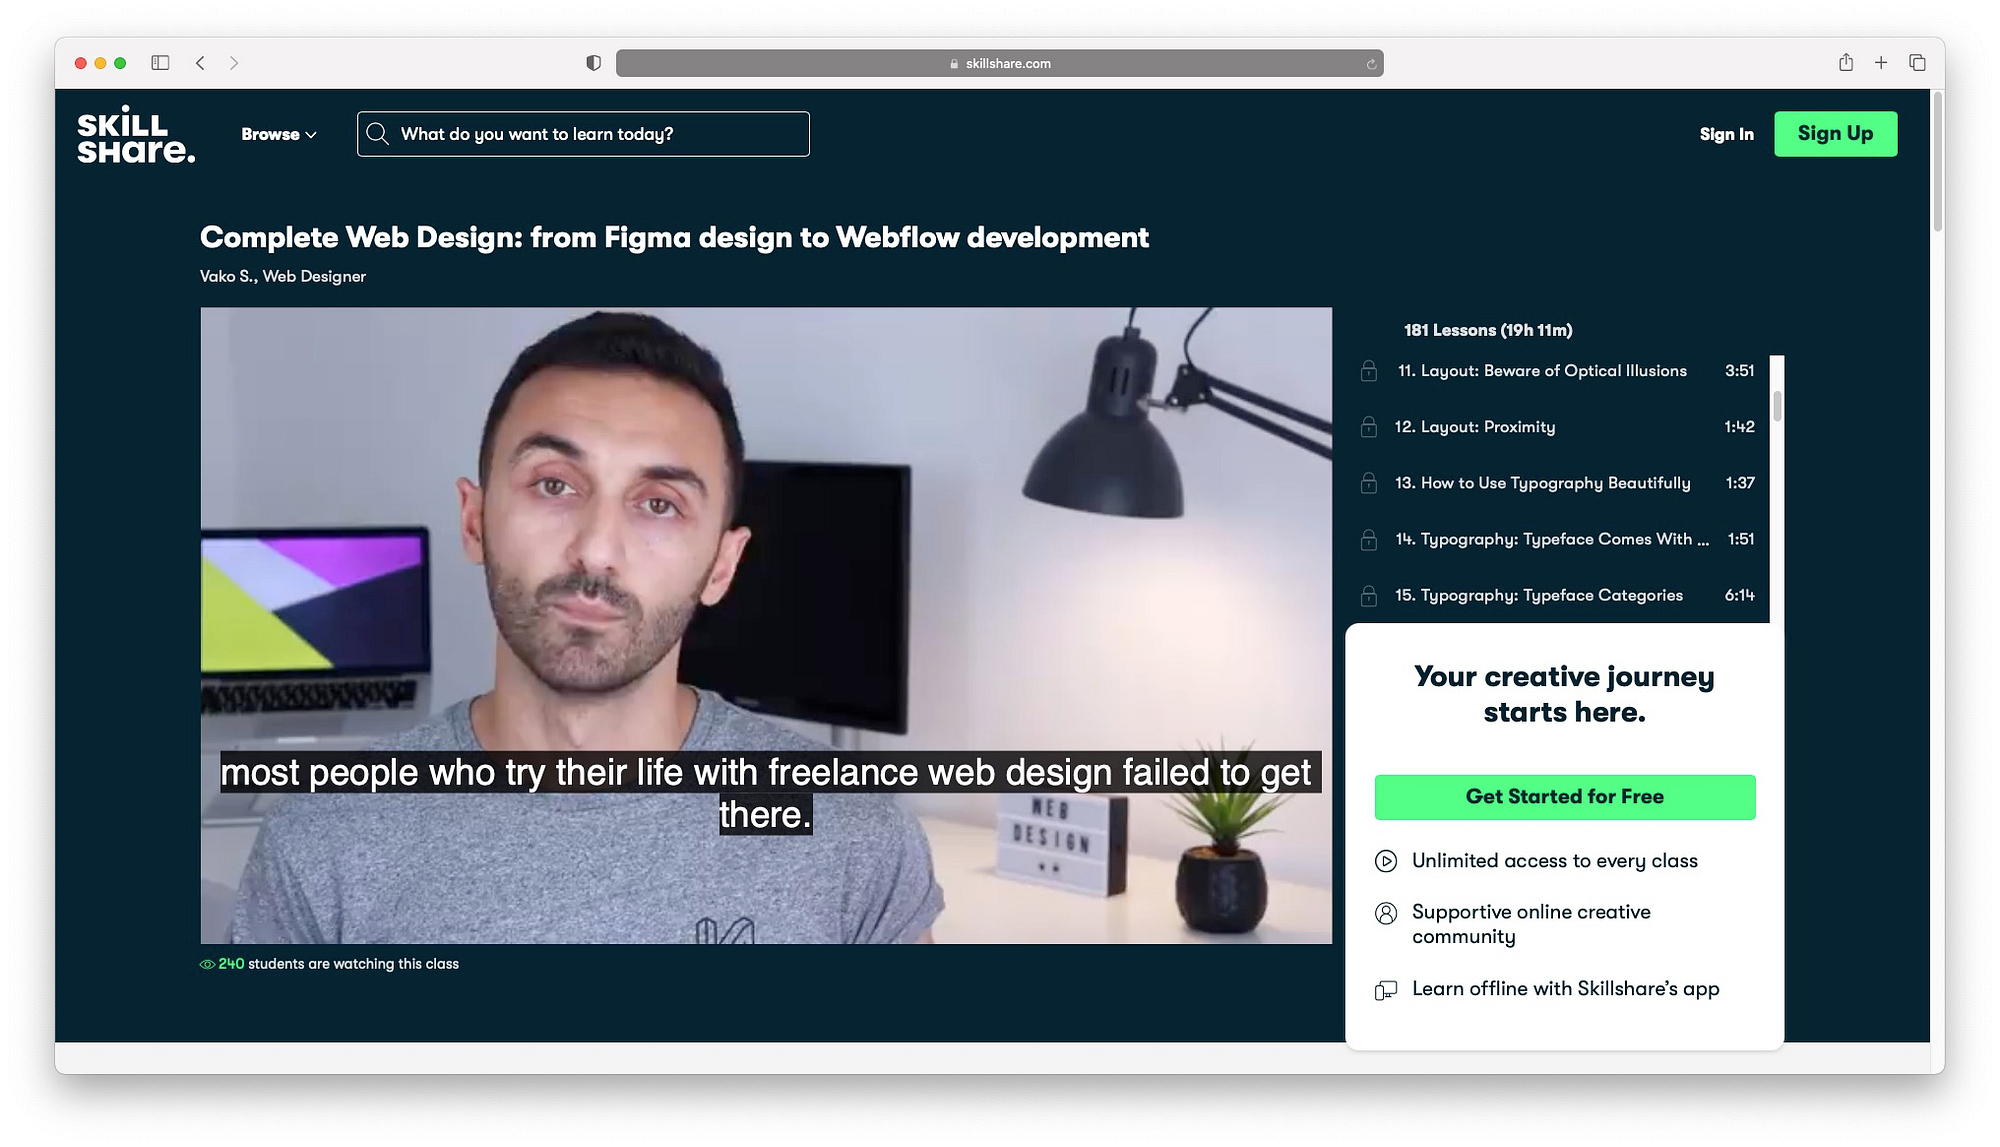 Skillshare offer a web design course online that's perfect for beginners